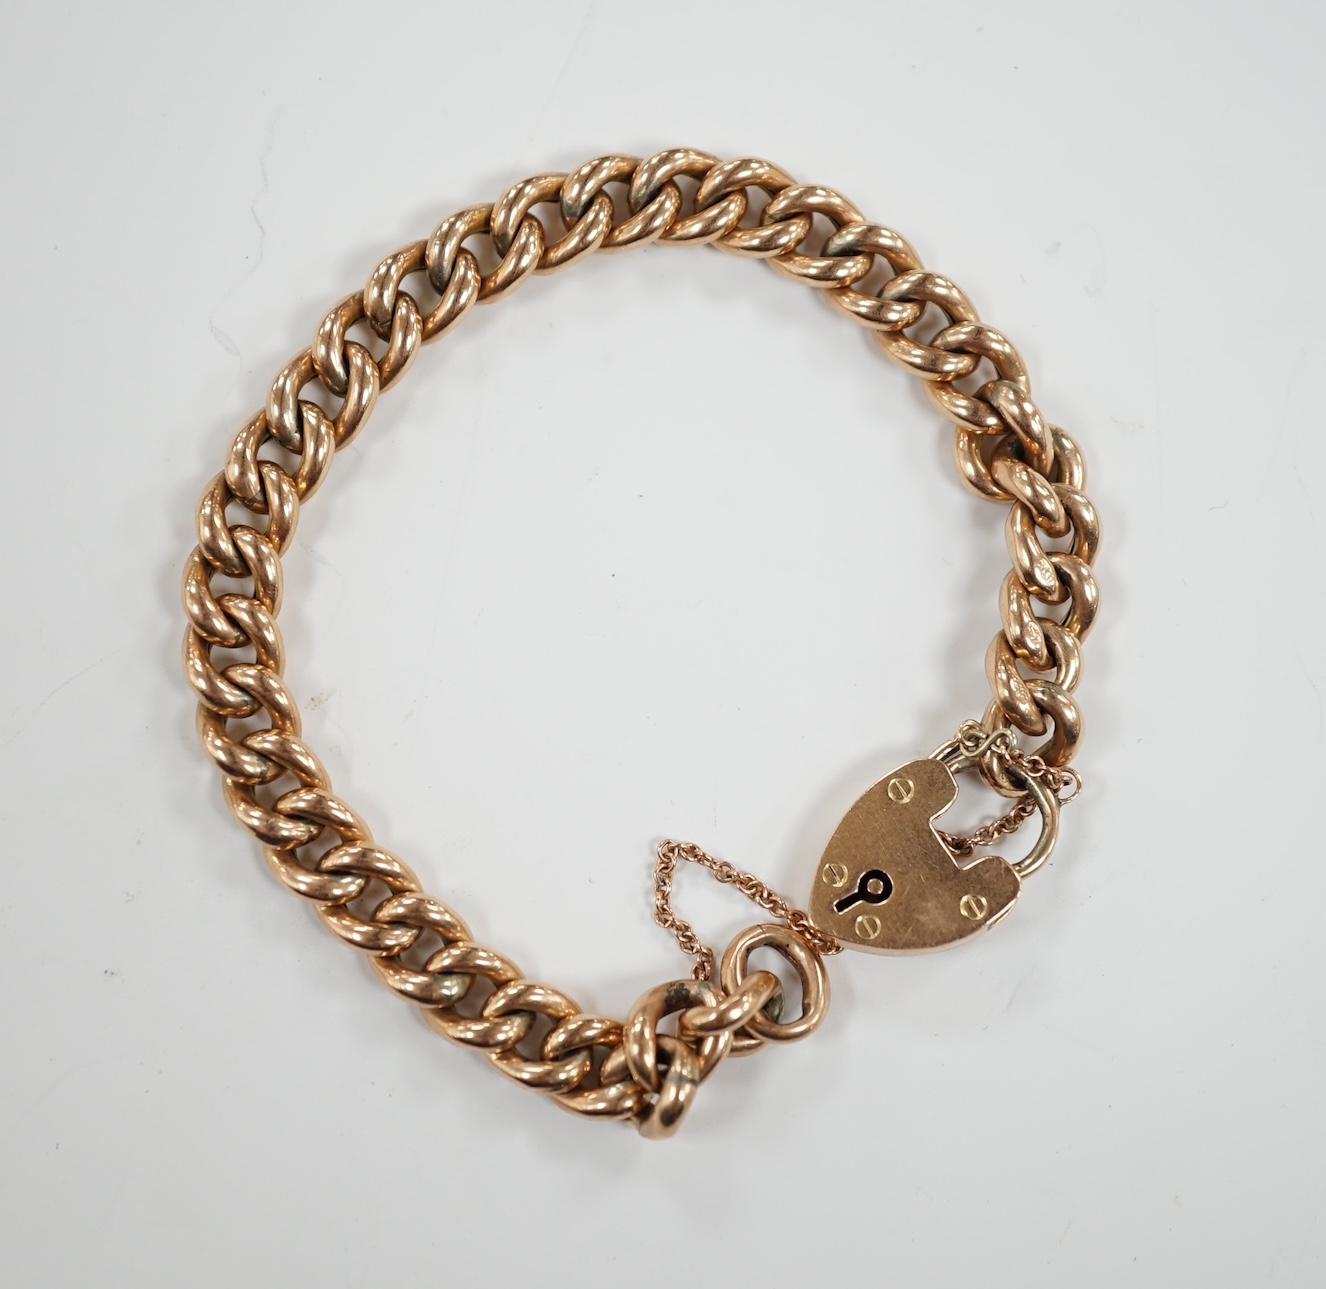 An Edwardian 9ct gold curb link bracelet, with heart shaped padlock clasp, 18cm